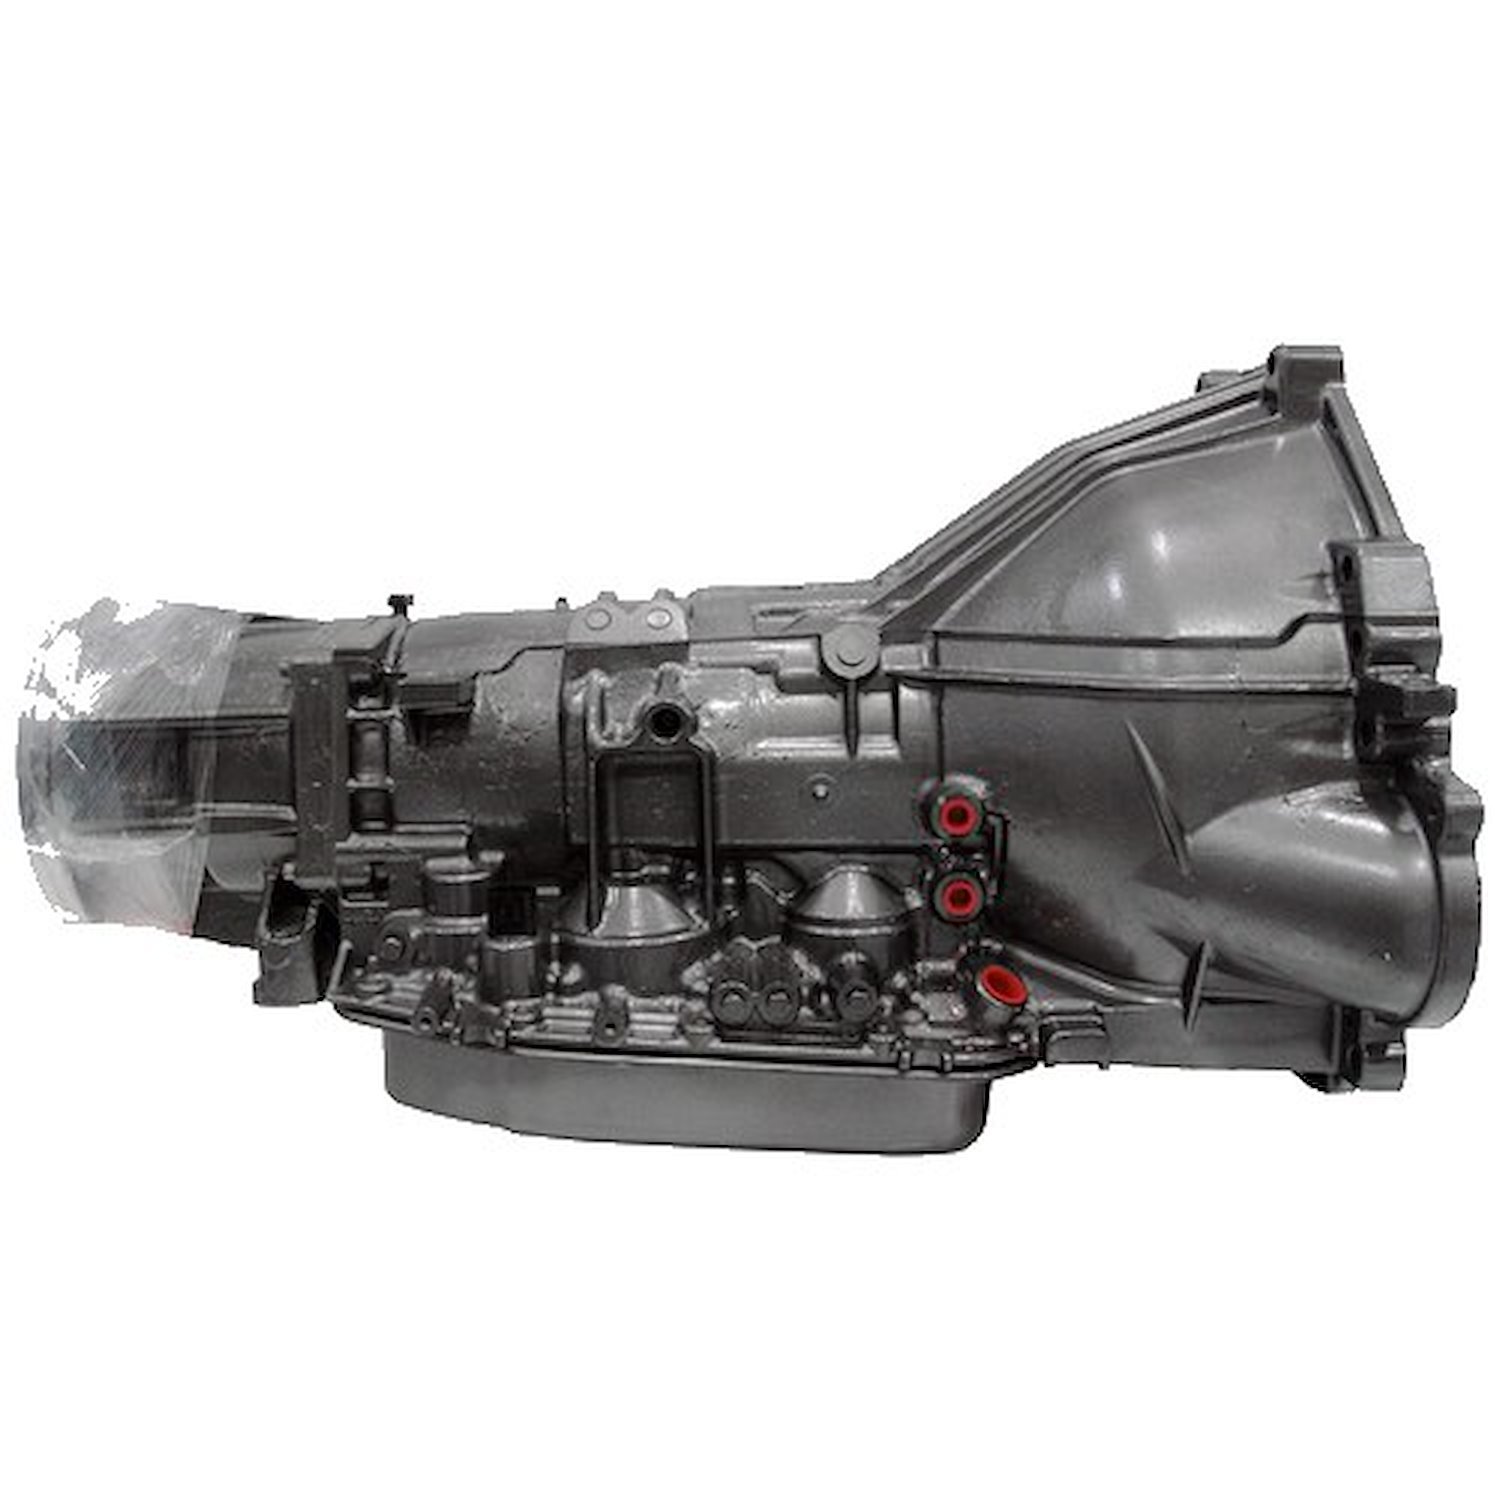 AODE Reman Auto Trans Fits 1994-1995 Ford Mustang w/3.8L V6 Eng.